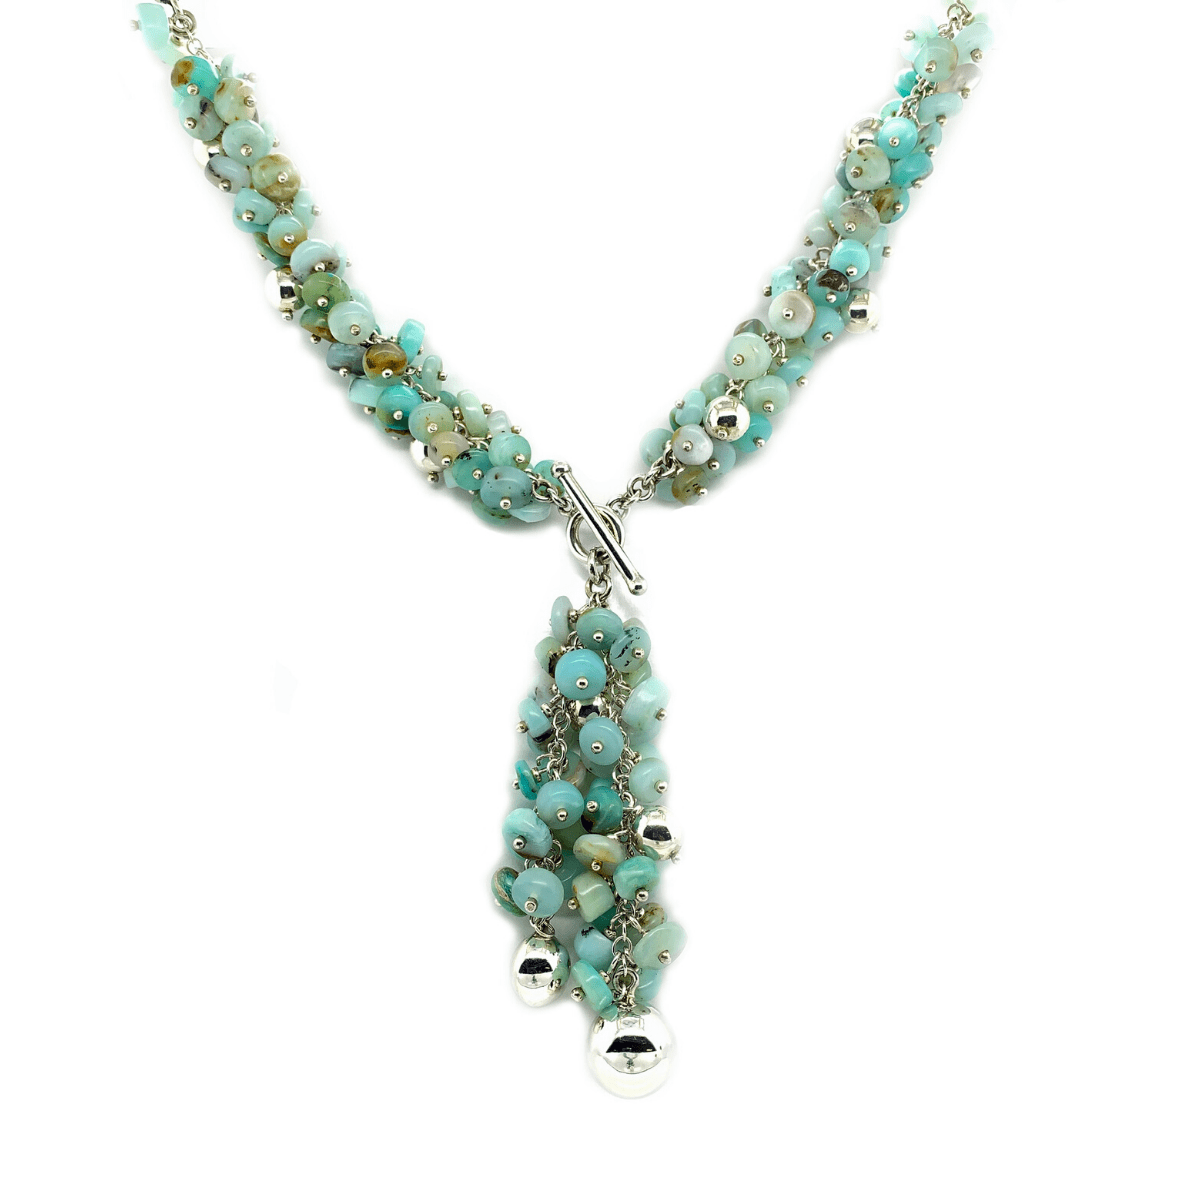 Peruvian Blue Opal Clusters &amp; Sterling Silver Balls Toggle Necklace - Qinti - The Peruvian Shop